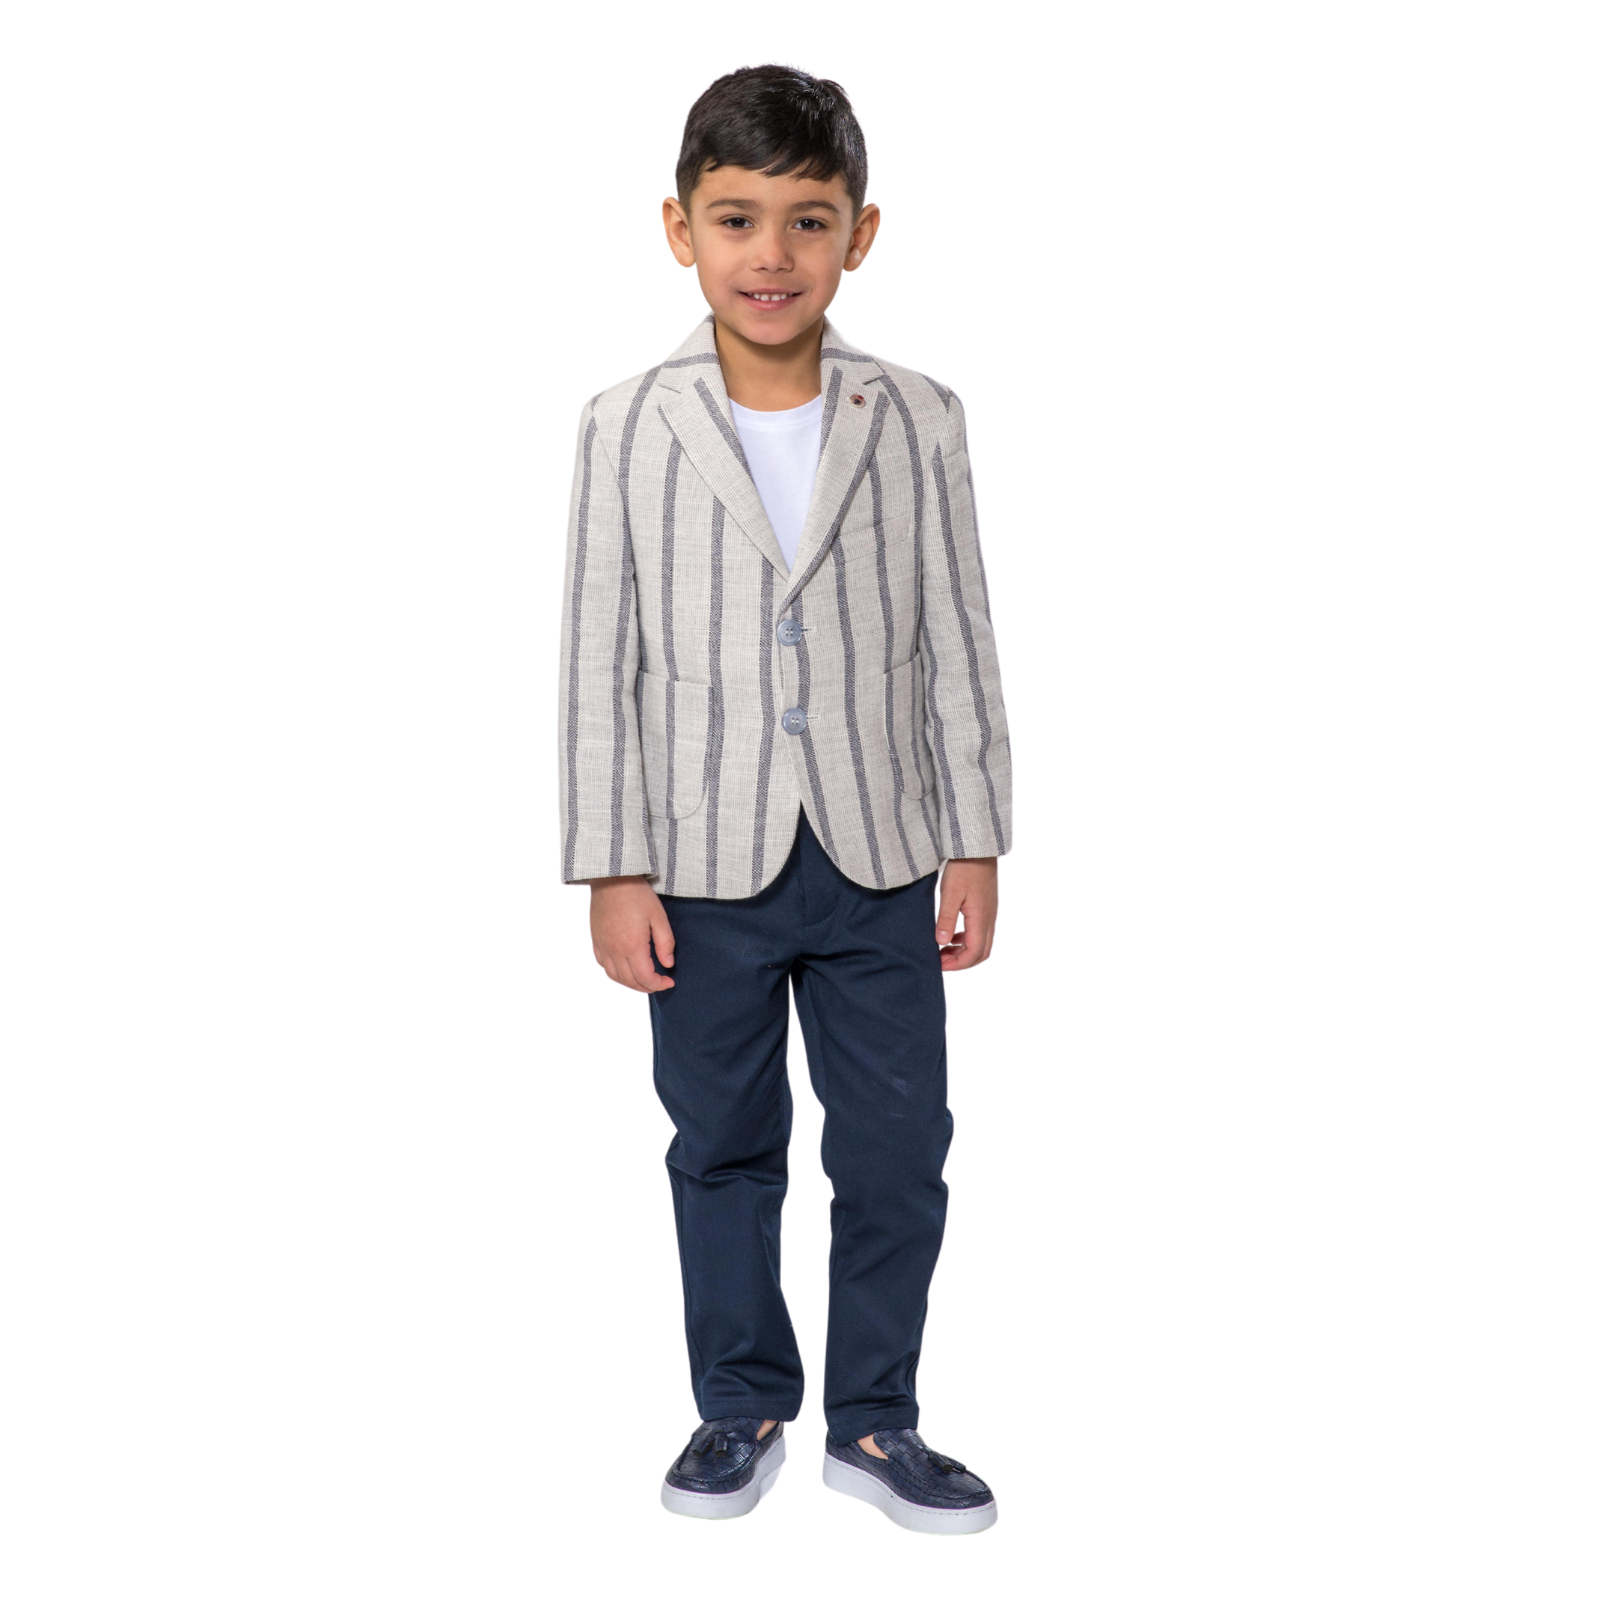 Chico Charles Boys Cool Suit